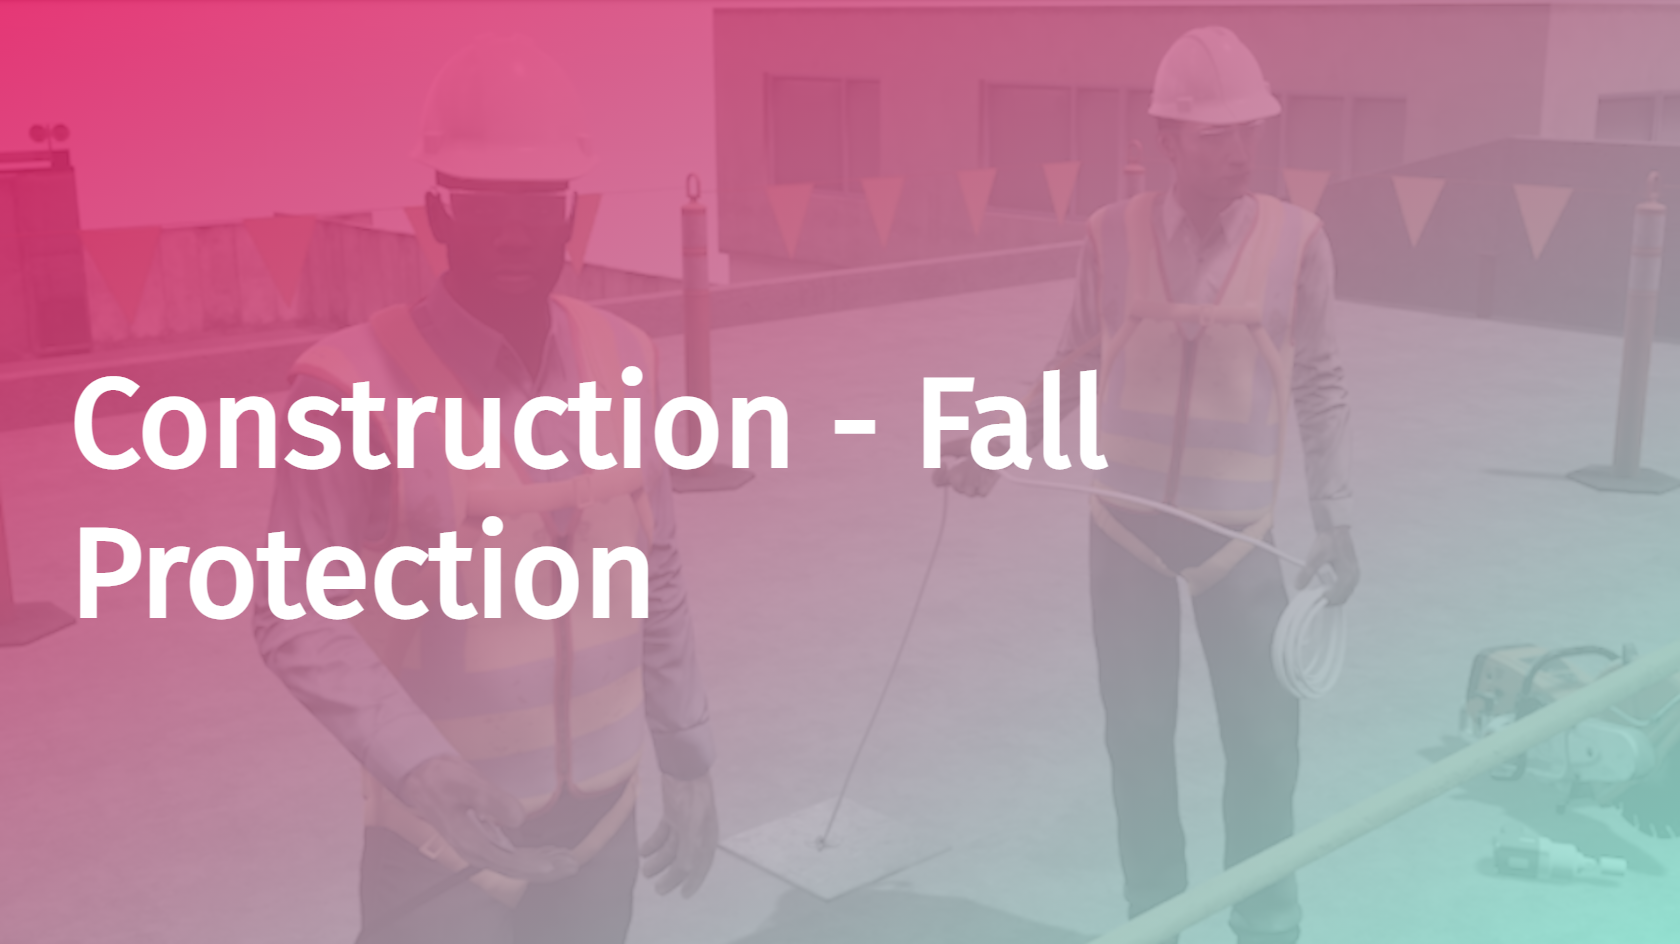 Construction - Fall Protection